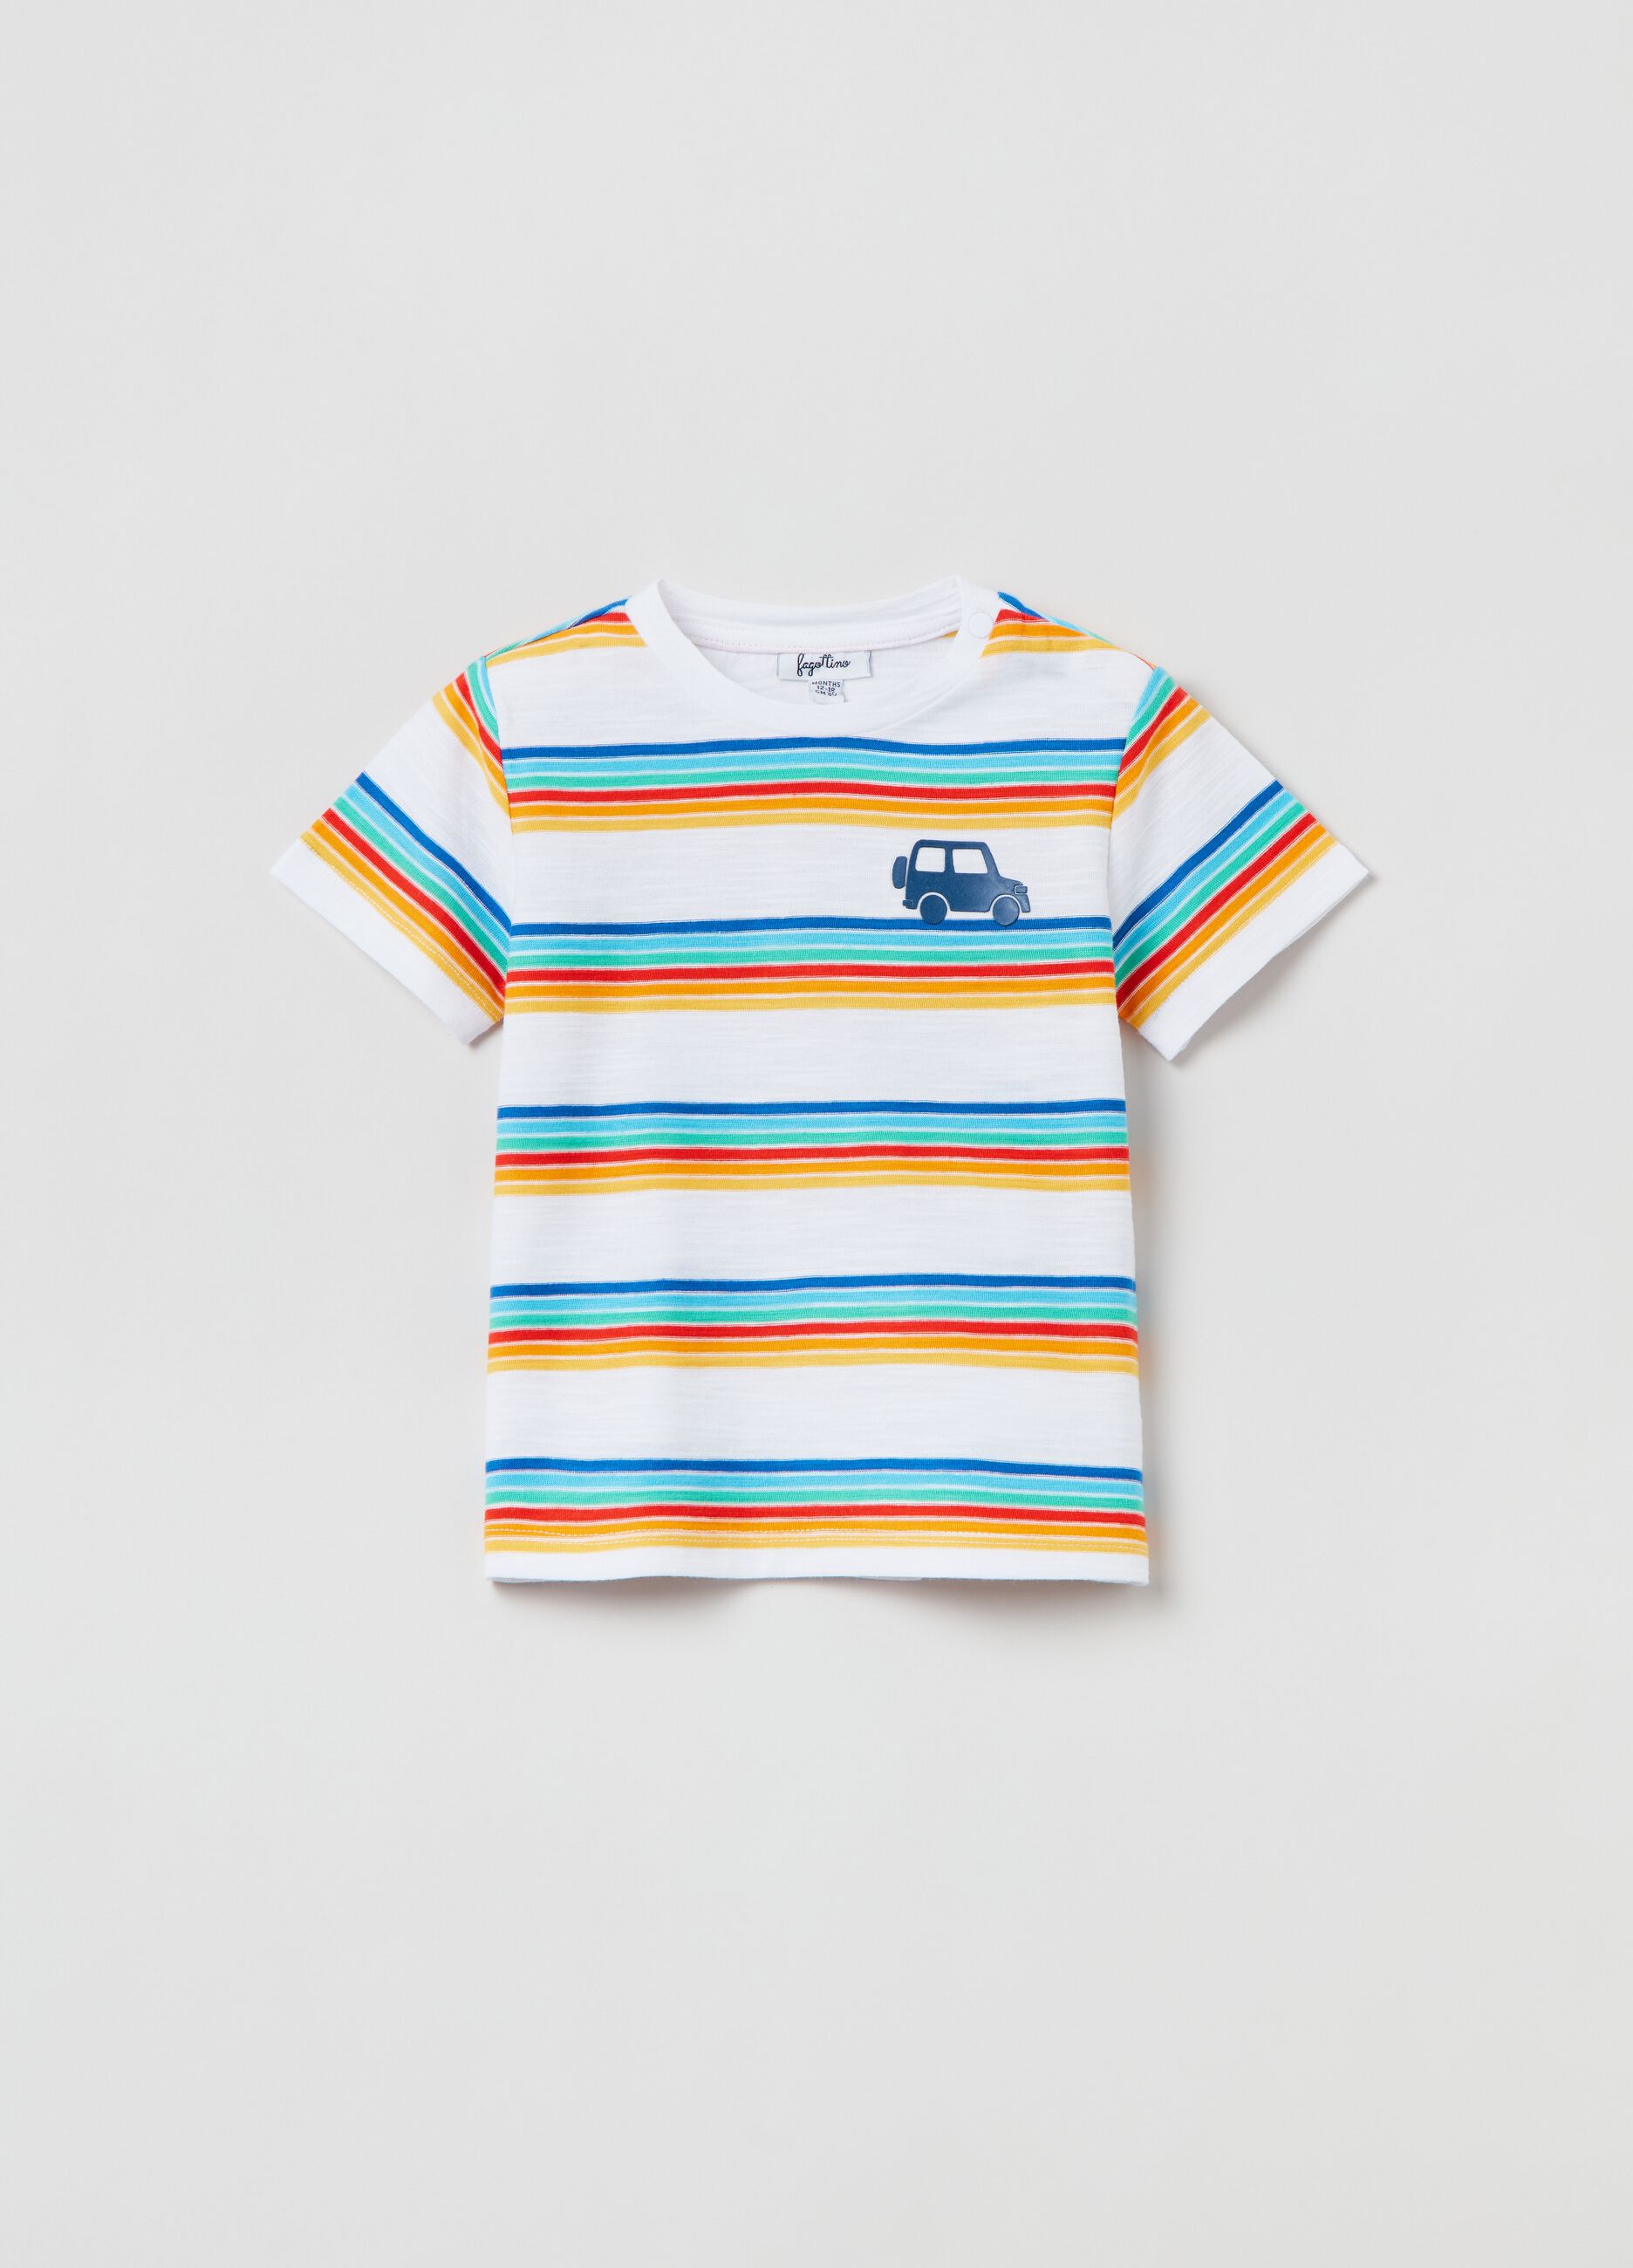 T-shirt in yarn-dyed striped cotton